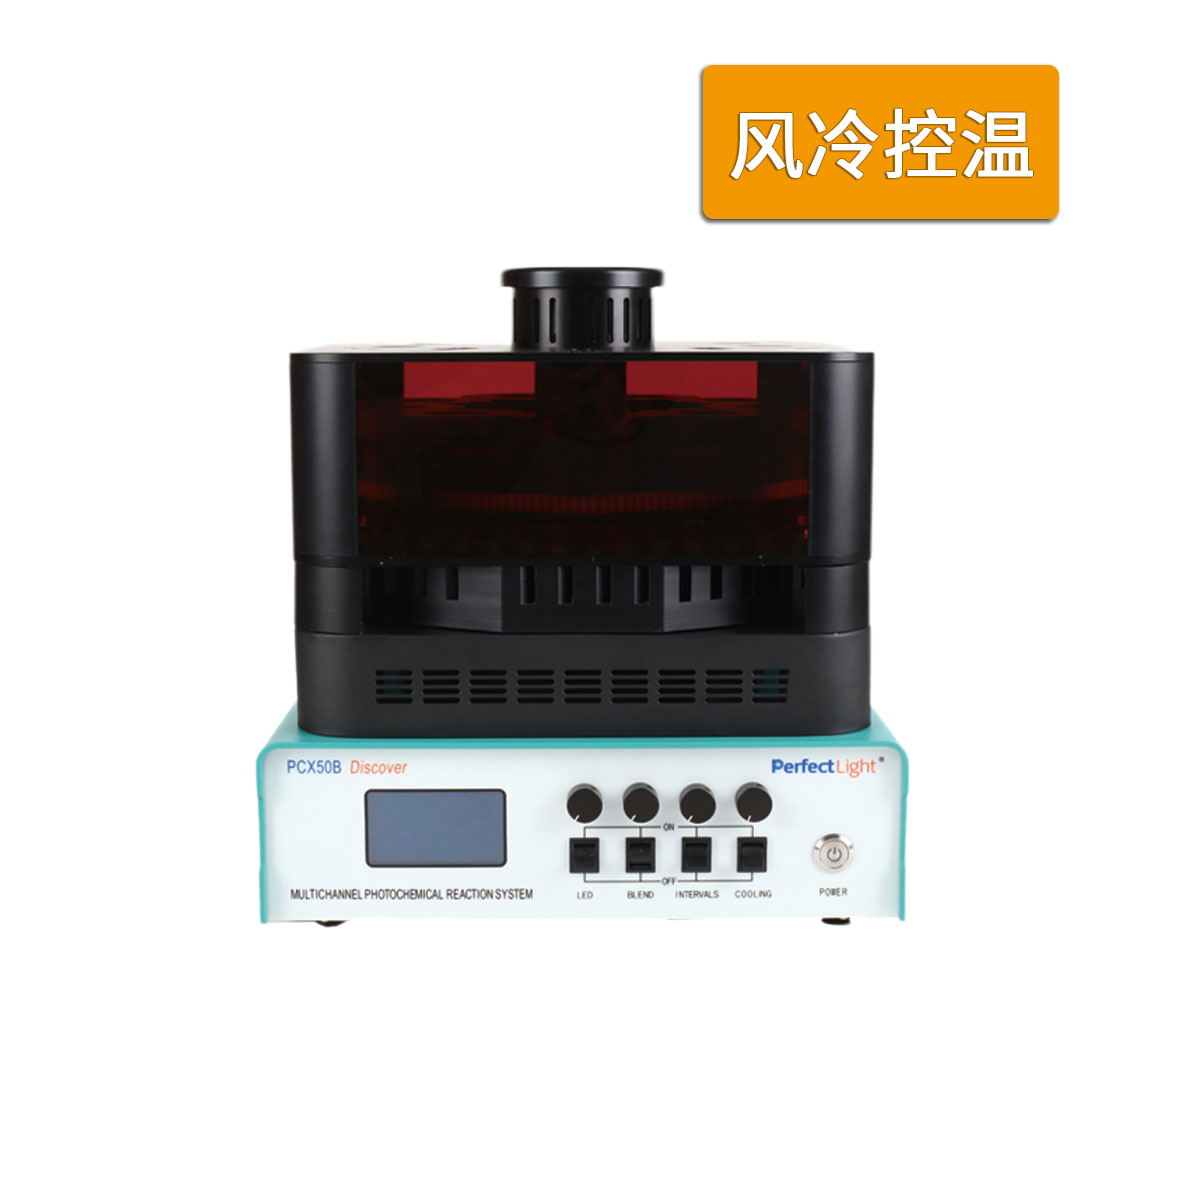 PCX-50B Multi-channel photochemical reaction system